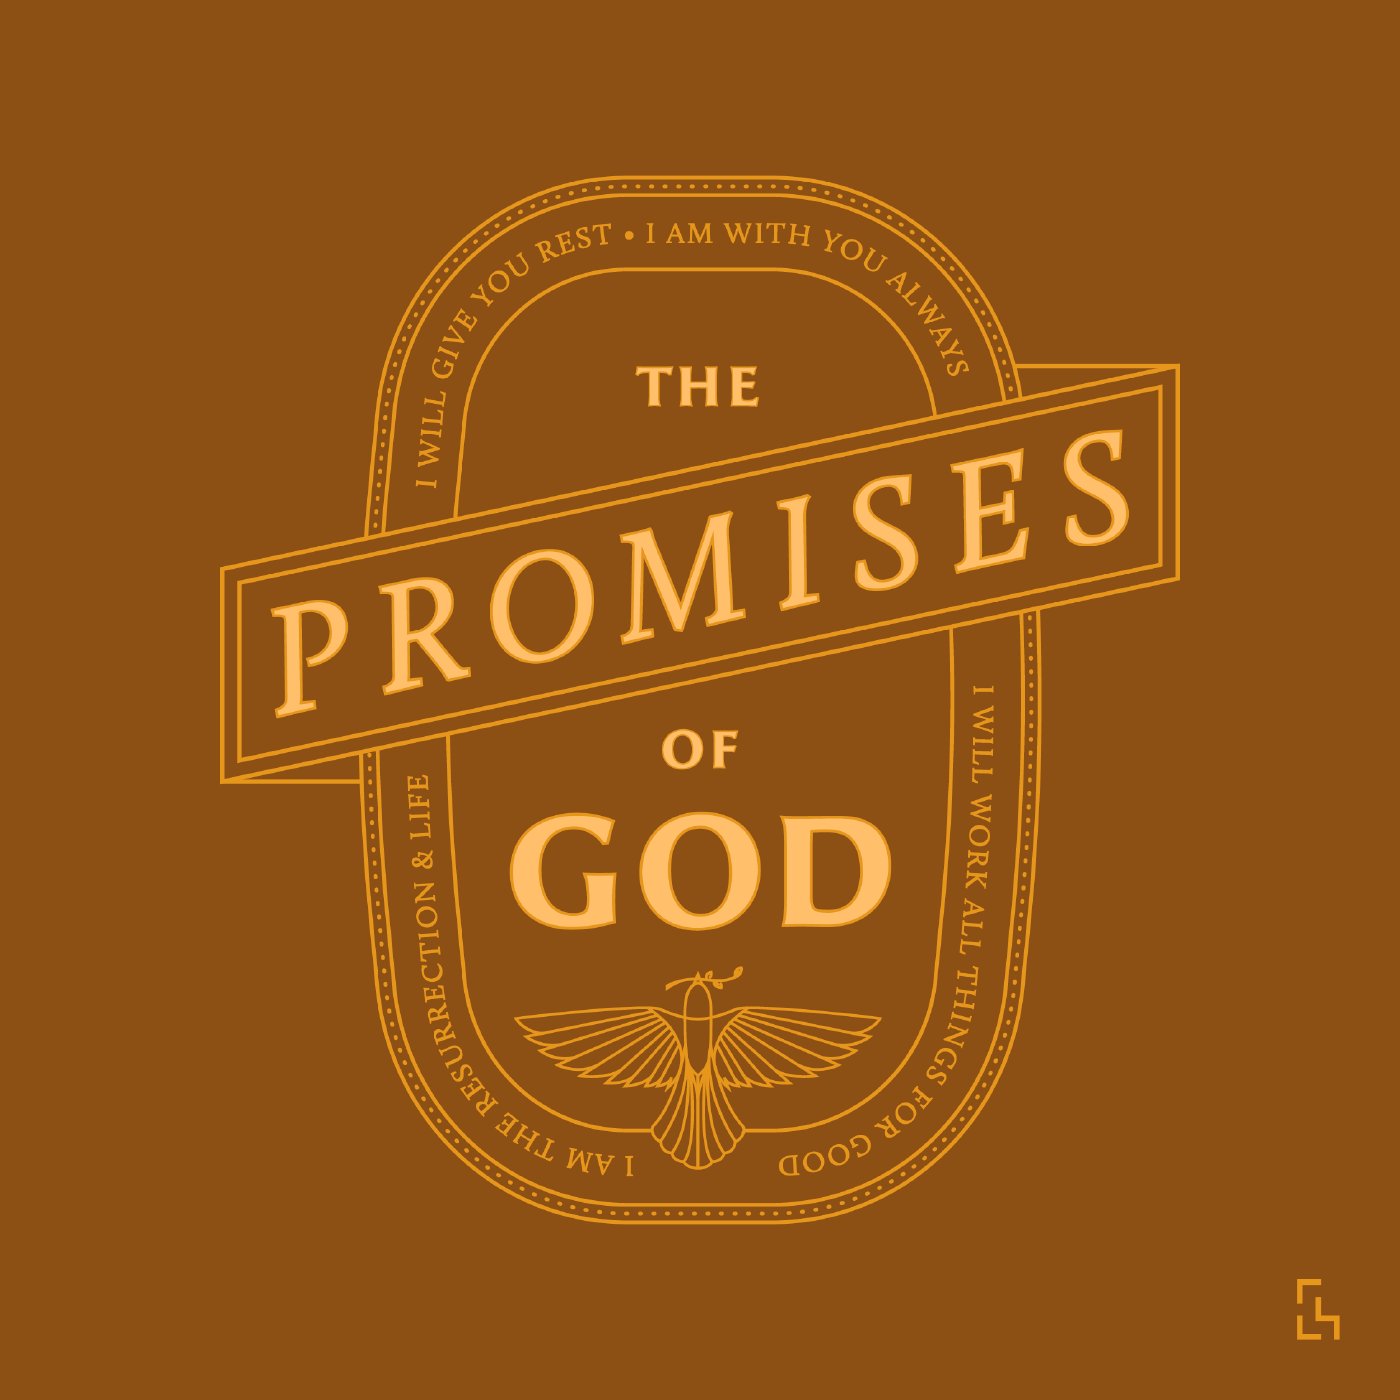 The Promises of God - I Am For You